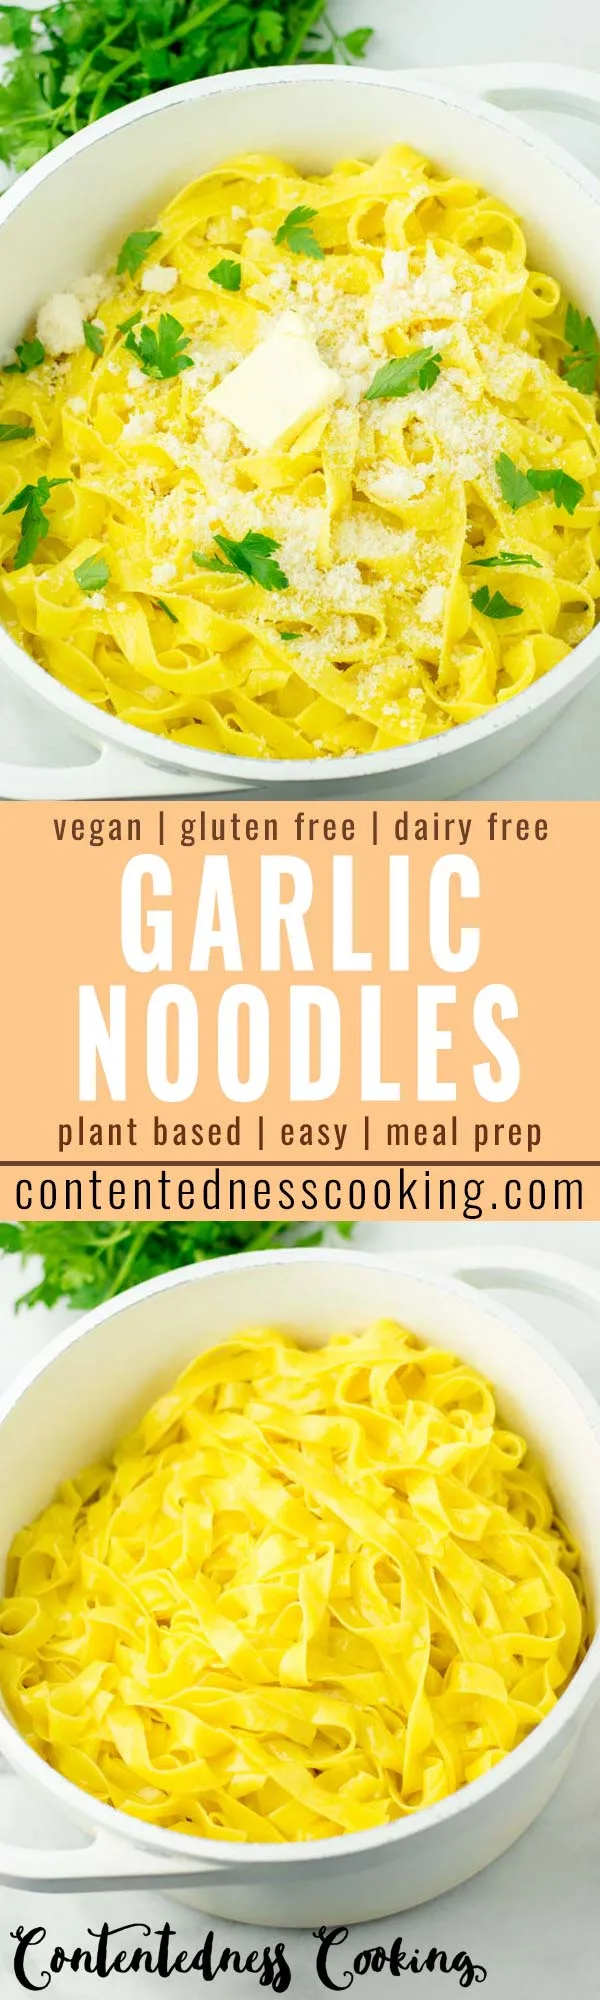 This garlic noodles are super easy to make and so satisfying! No one would ever guess it is vegan and even gluten free. Even your kids will love this pasta in no time. #vegan #dairyfree #glutenfree #vegetarian #garlicnoodles #budgetmeals #kidsmealsideas #familydinner #comfortfood #mealprep #worklunchideas #contentednesscooking 